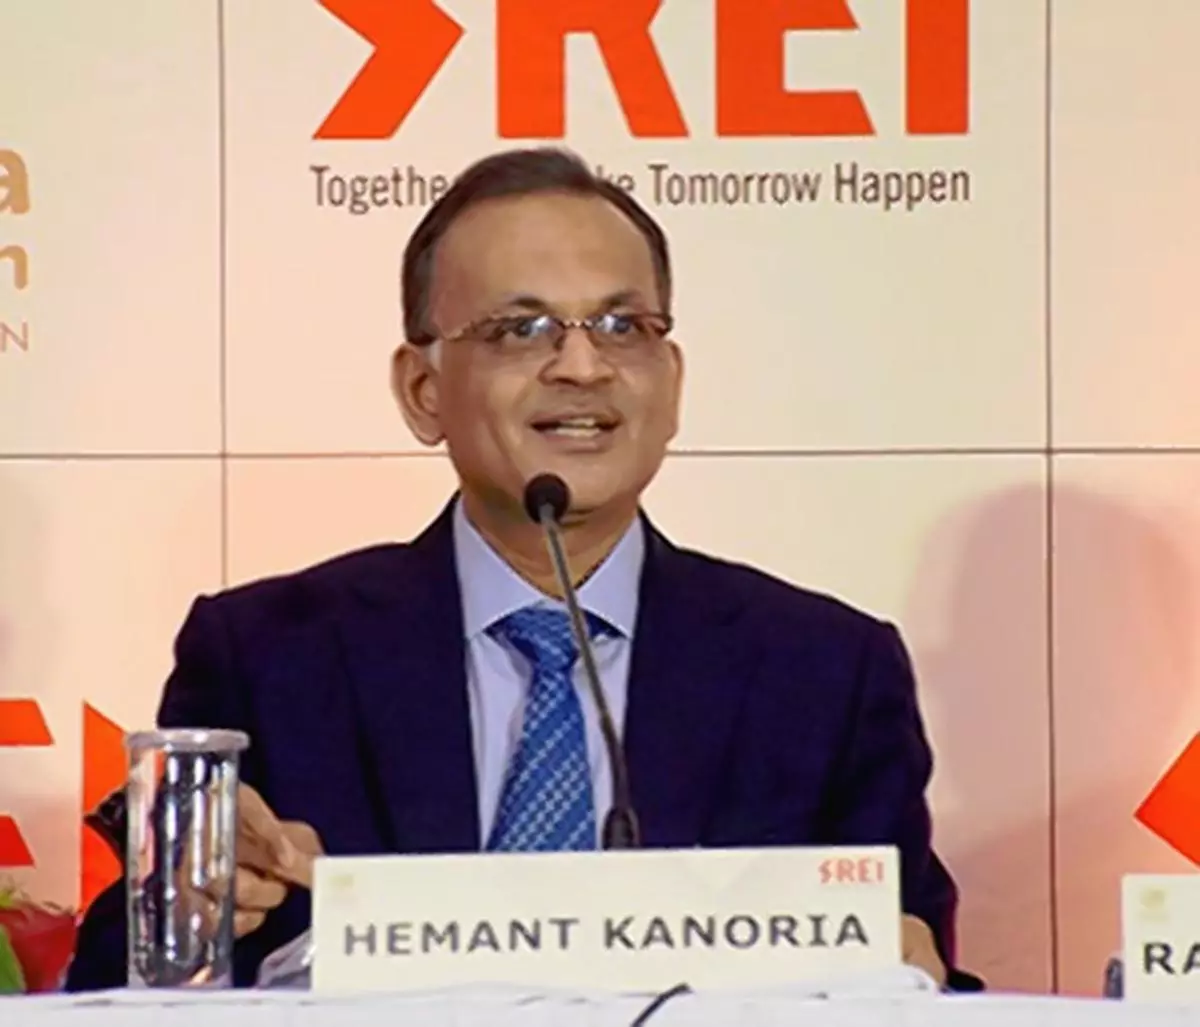 Hemant Kanoria, founder and the erstwhile director of Srei Infrastructure Finance